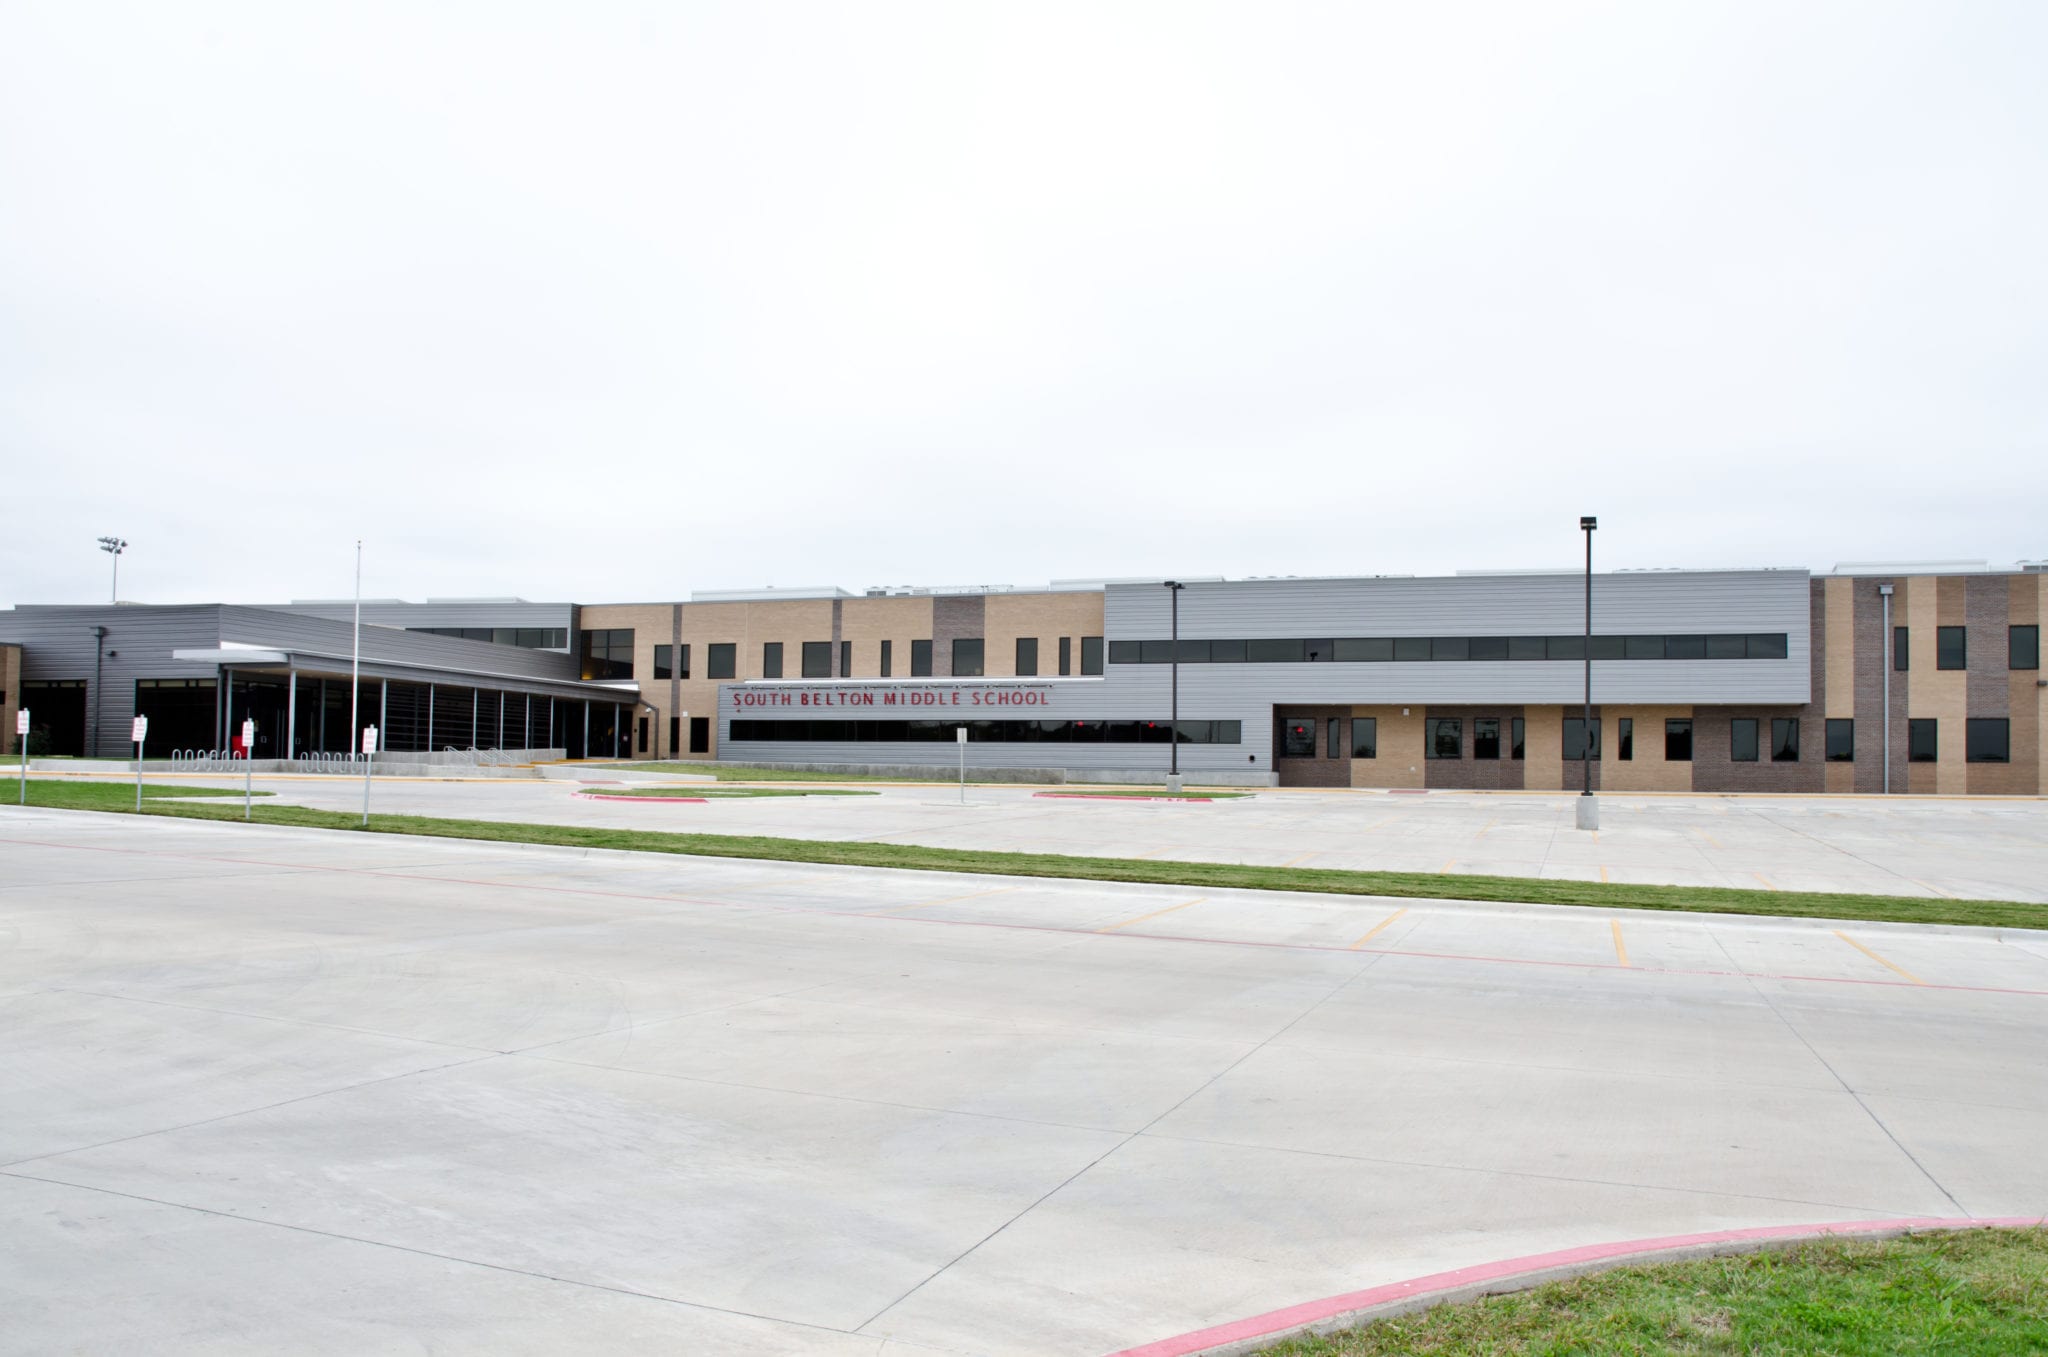 South Belton Middle School - Baird Williams Construction